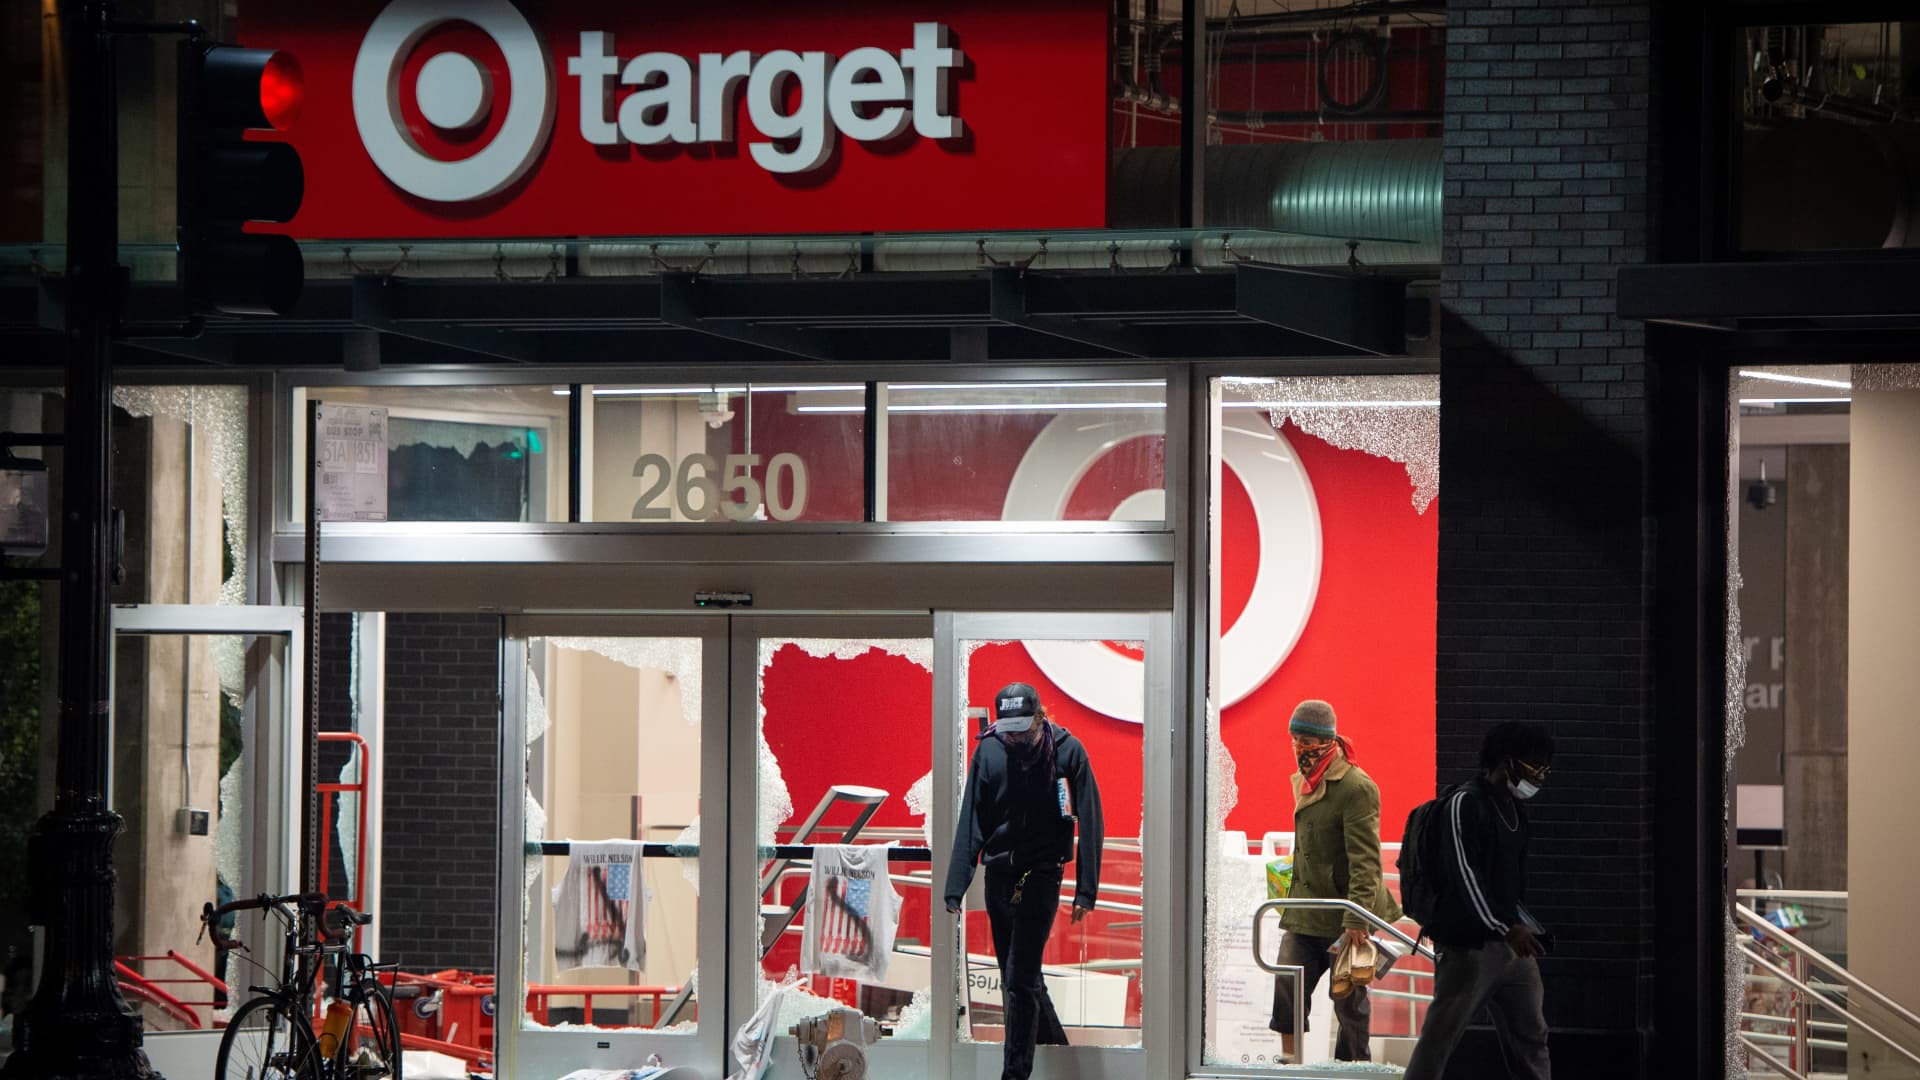 Looters rob a Target store during protests in Oakland, California, on May 30, 2020, over the death of George Floyd.